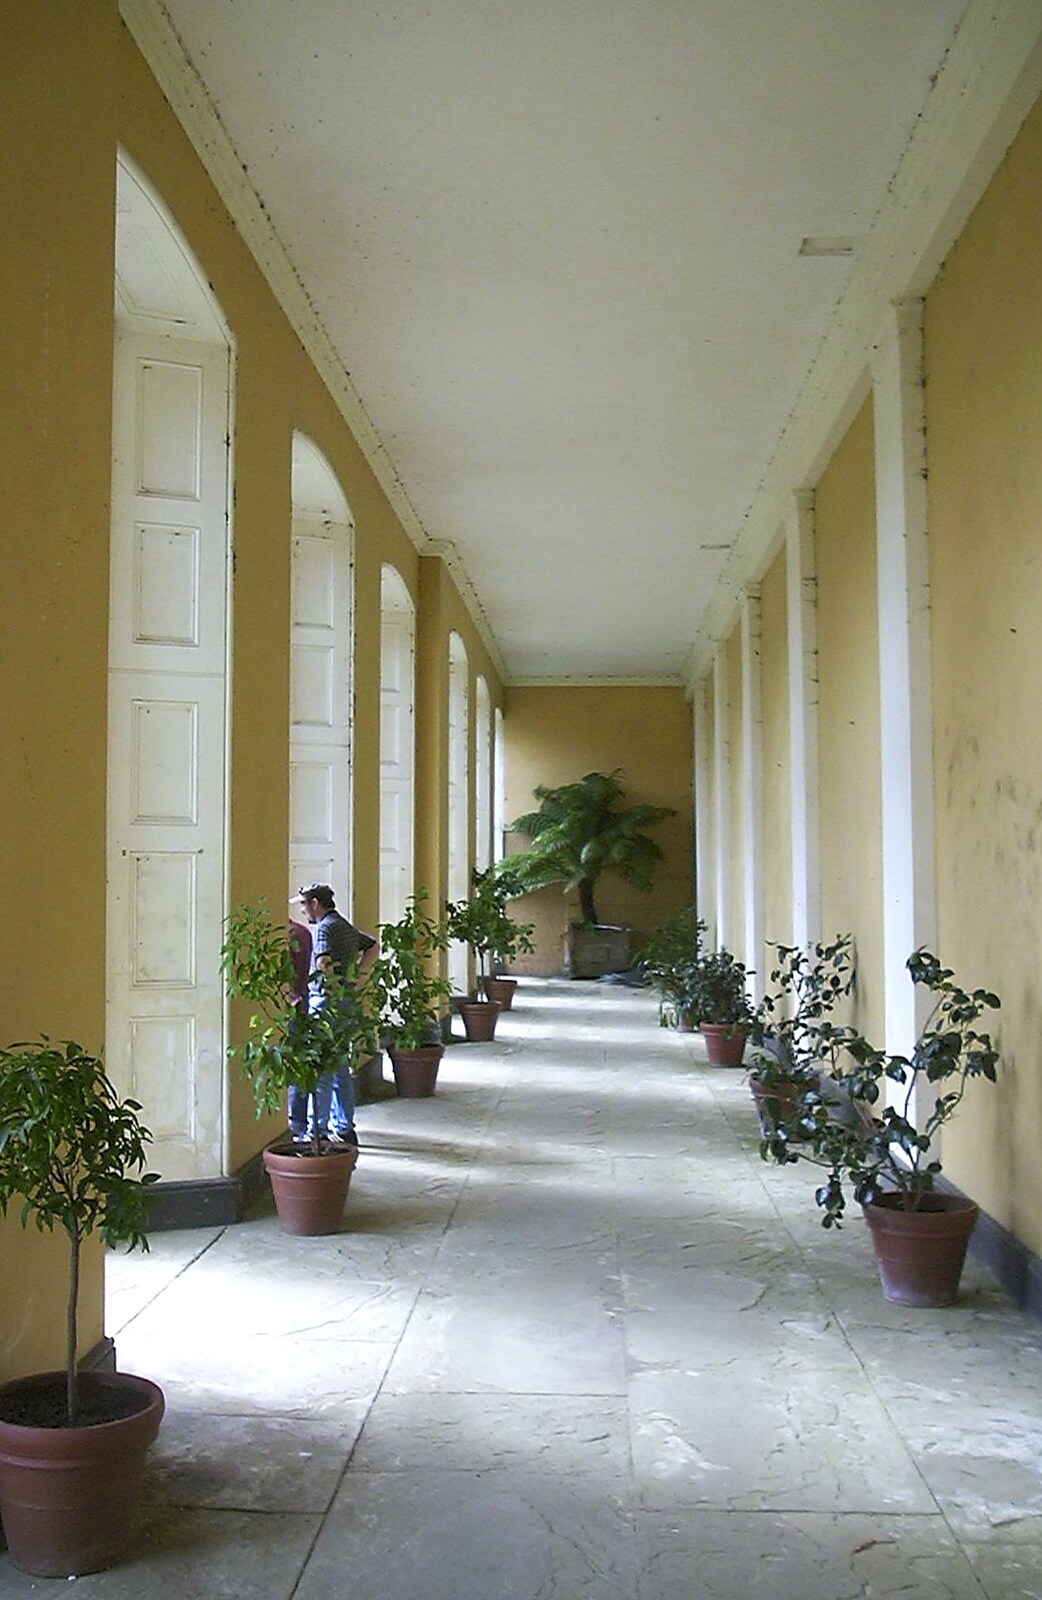 Inside the orangery from A Trip to Ickworth House, Horringer, Suffolk - 22nd August 2004